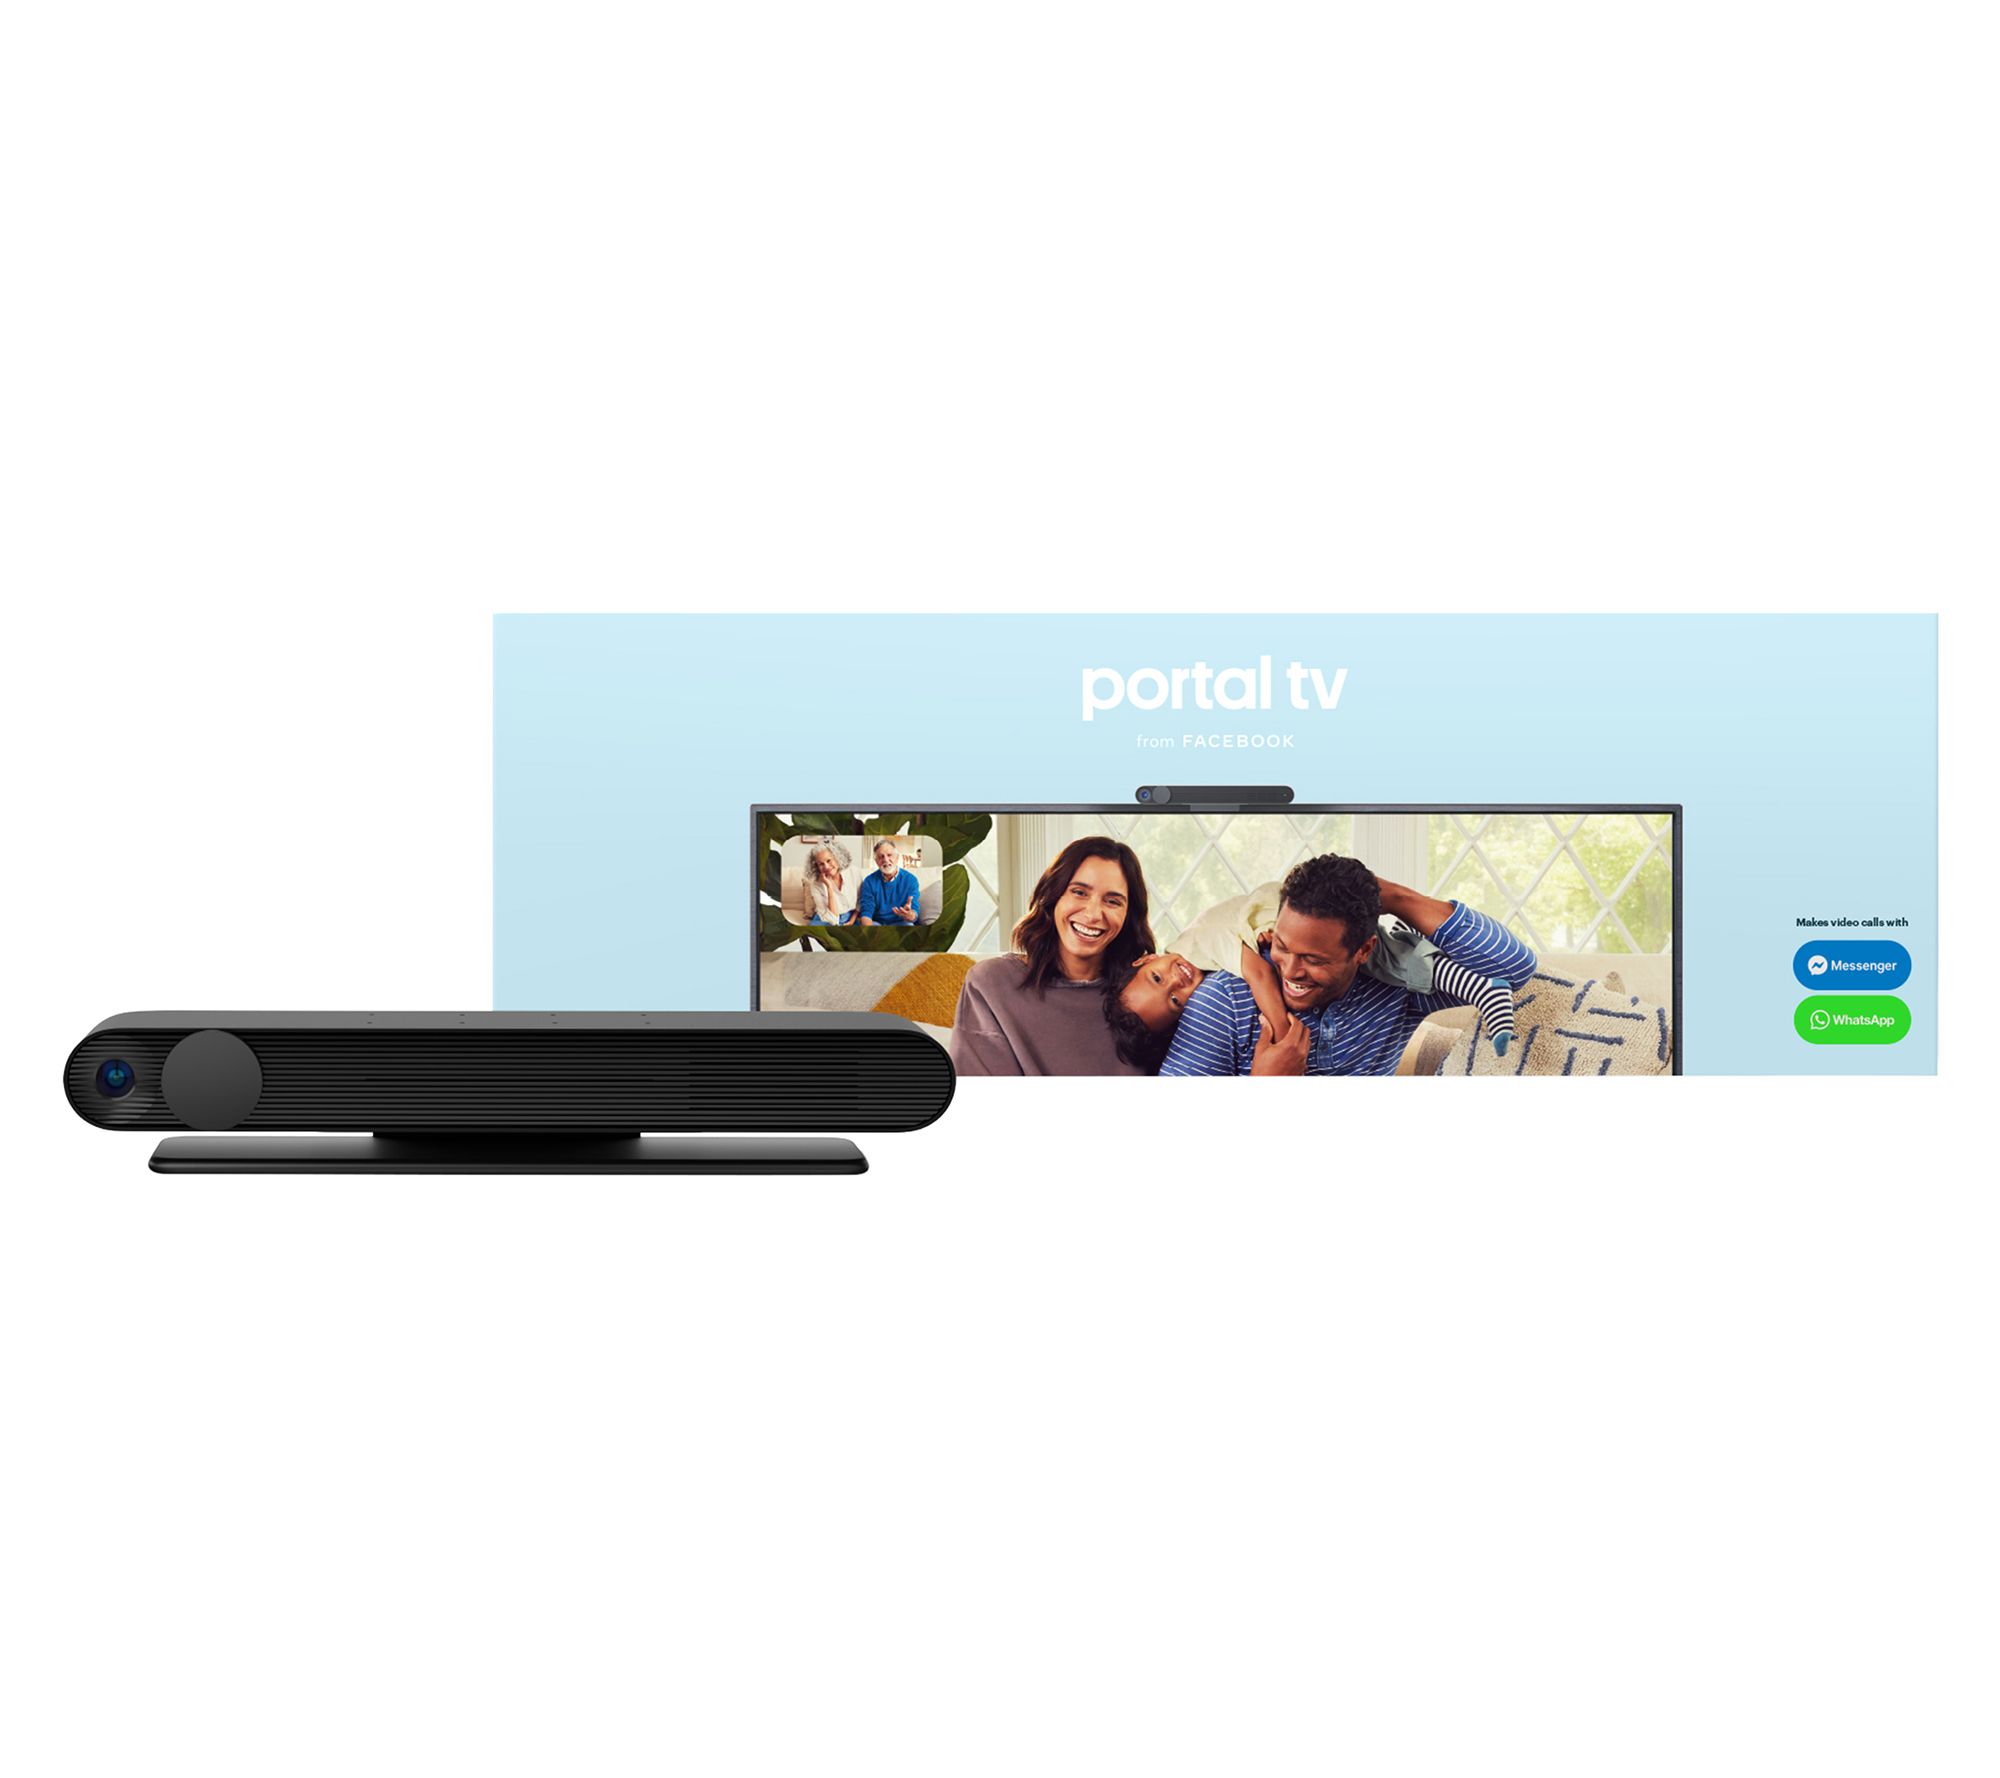  Facebook Portal Mini - Smart Video Calling 8” Touch Screen  Display with Alexa - White : Electronics